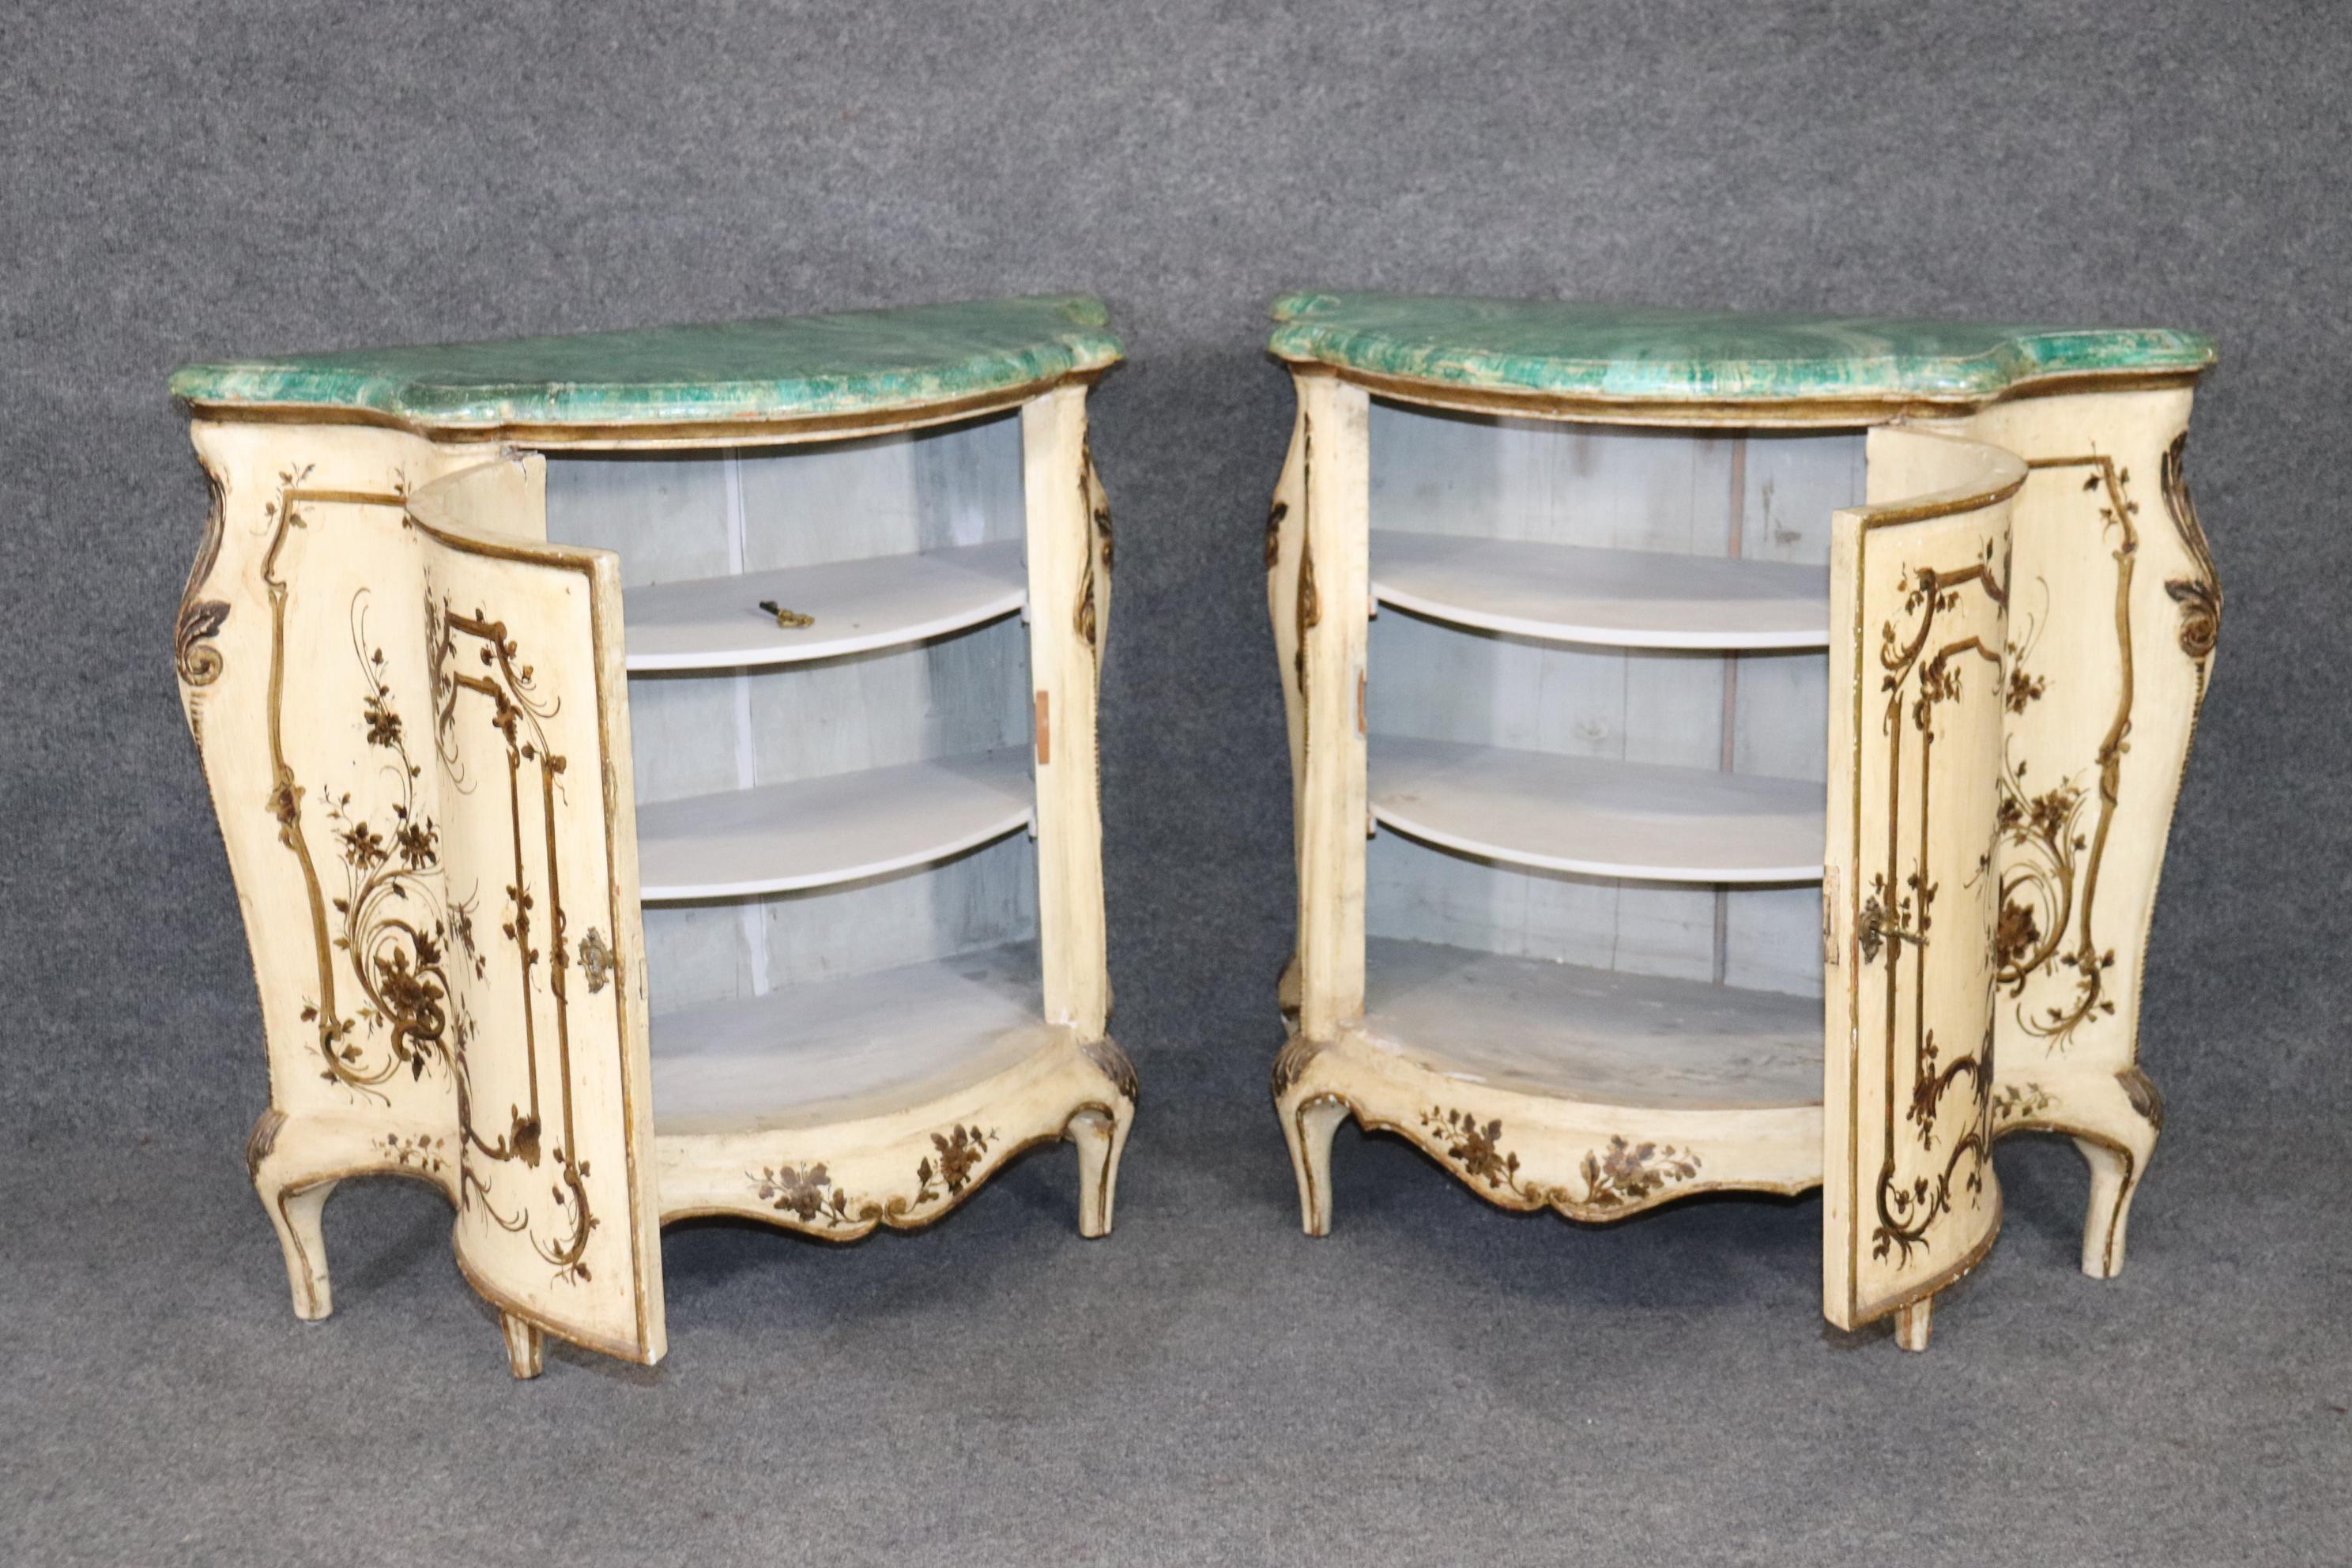 Rococo Revival Pair Faux Malachite Paint Decorated Venetian Nightstands Circa 1920